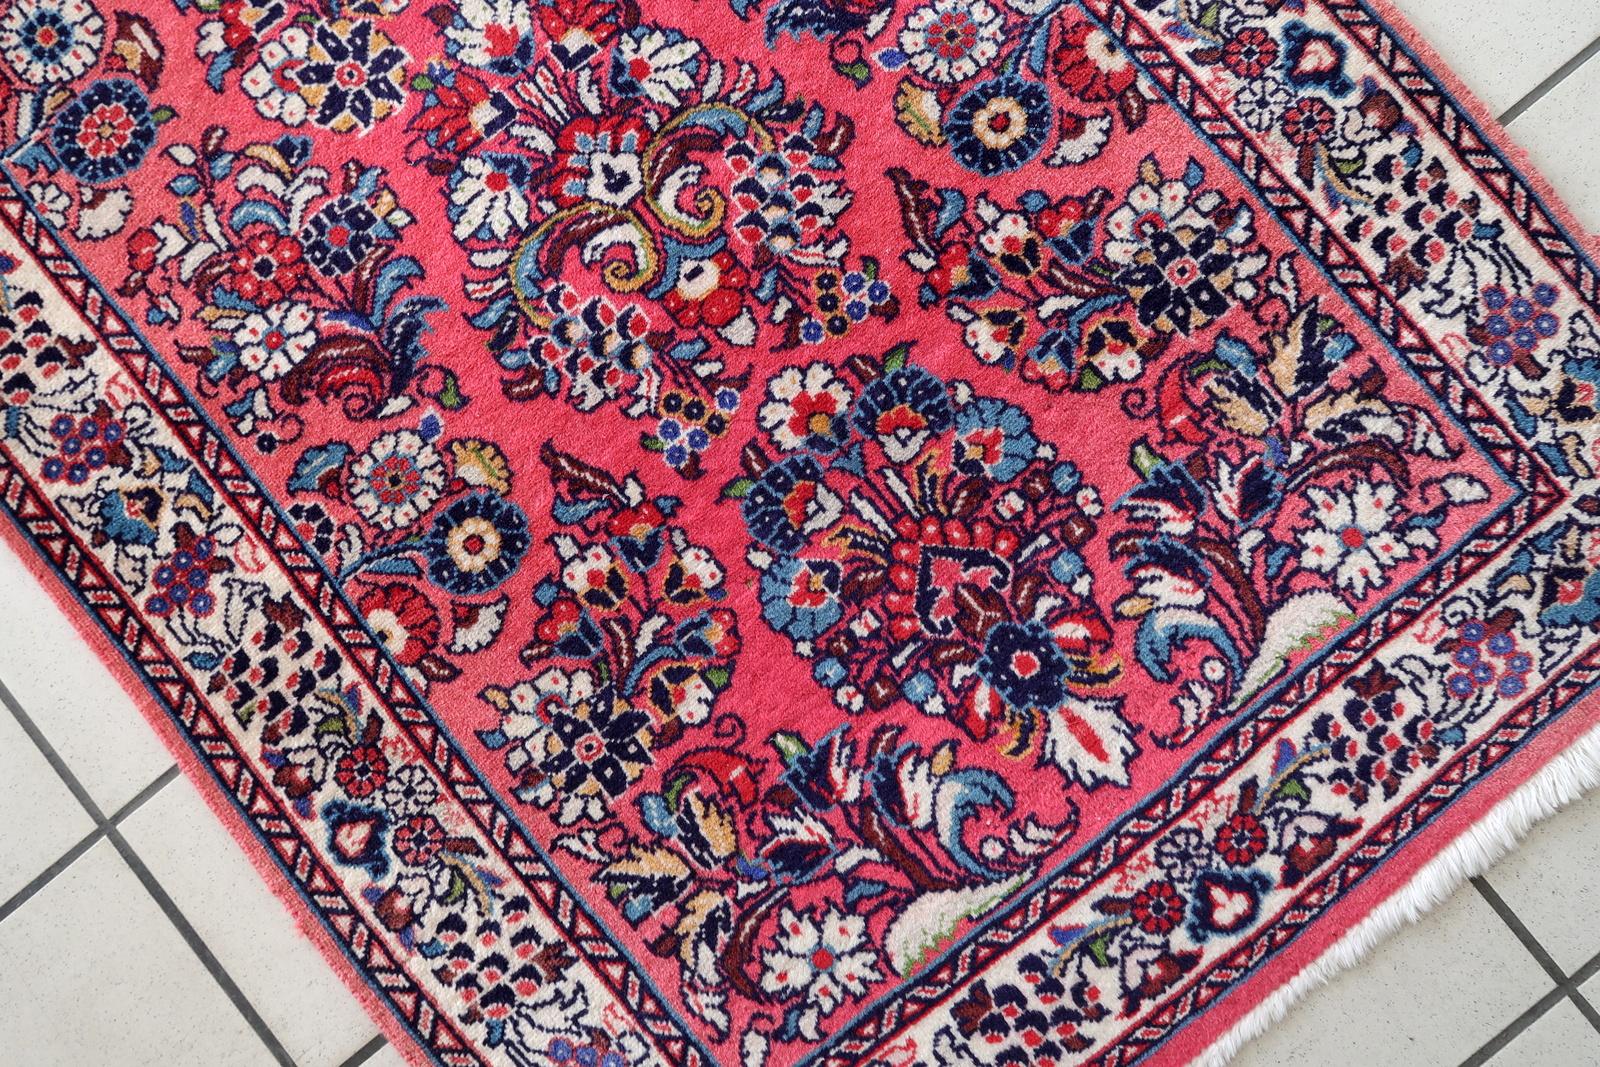 Elevate your home decor with this Handmade Vintage Persian Sarouk Runner. Crafted in the 1960s, this rug measures 2.6' x 6.8' (81cm x 208cm) and is in good, faded condition. Made from high-quality wool, it originates from the Middle East, boasting